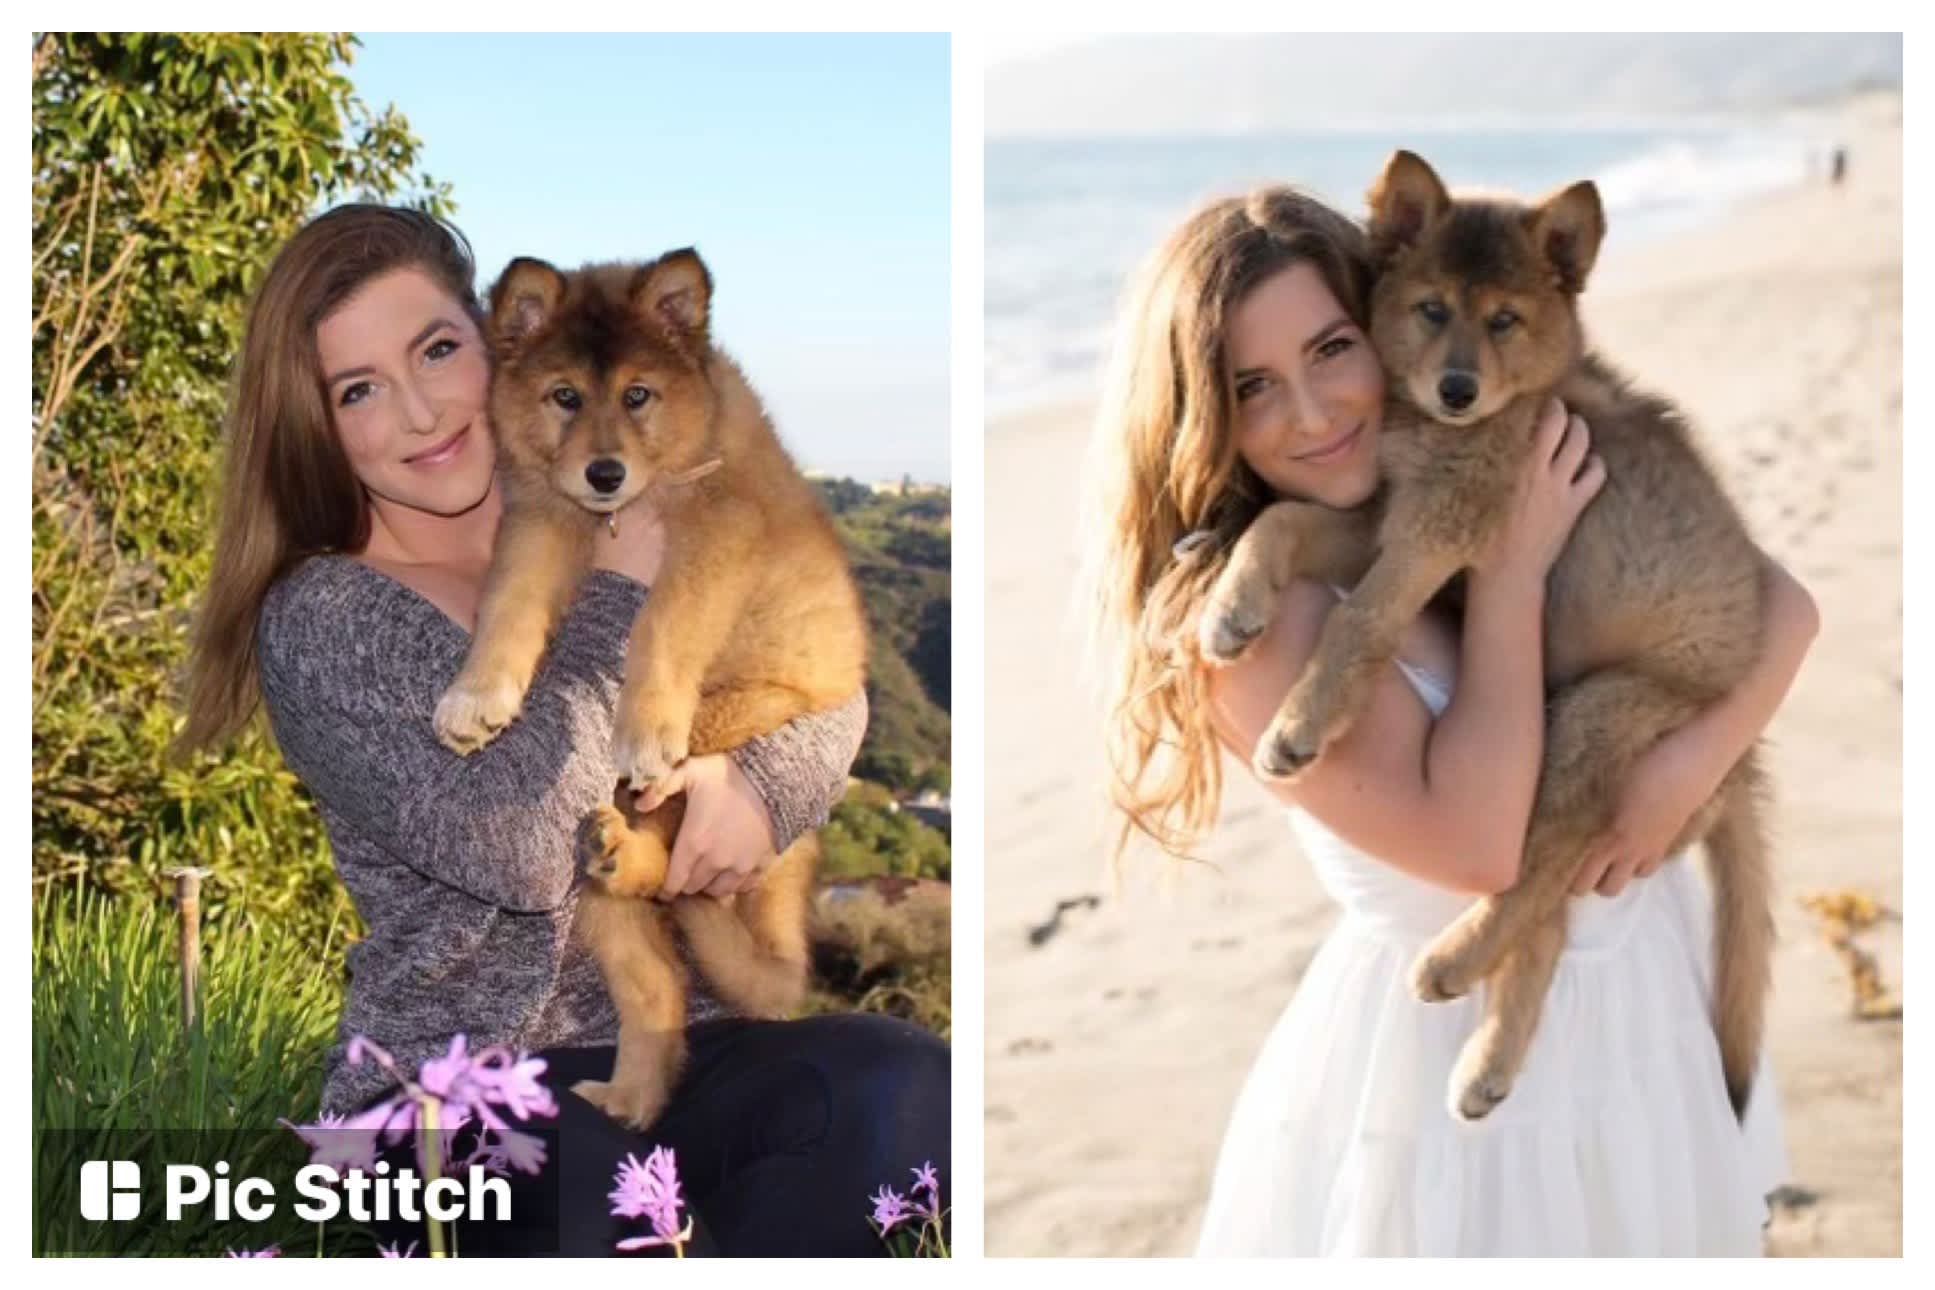 Grief-stricken pet owners usher in Instagram and TikTok’s new influencers: Their cloned cats and dogs